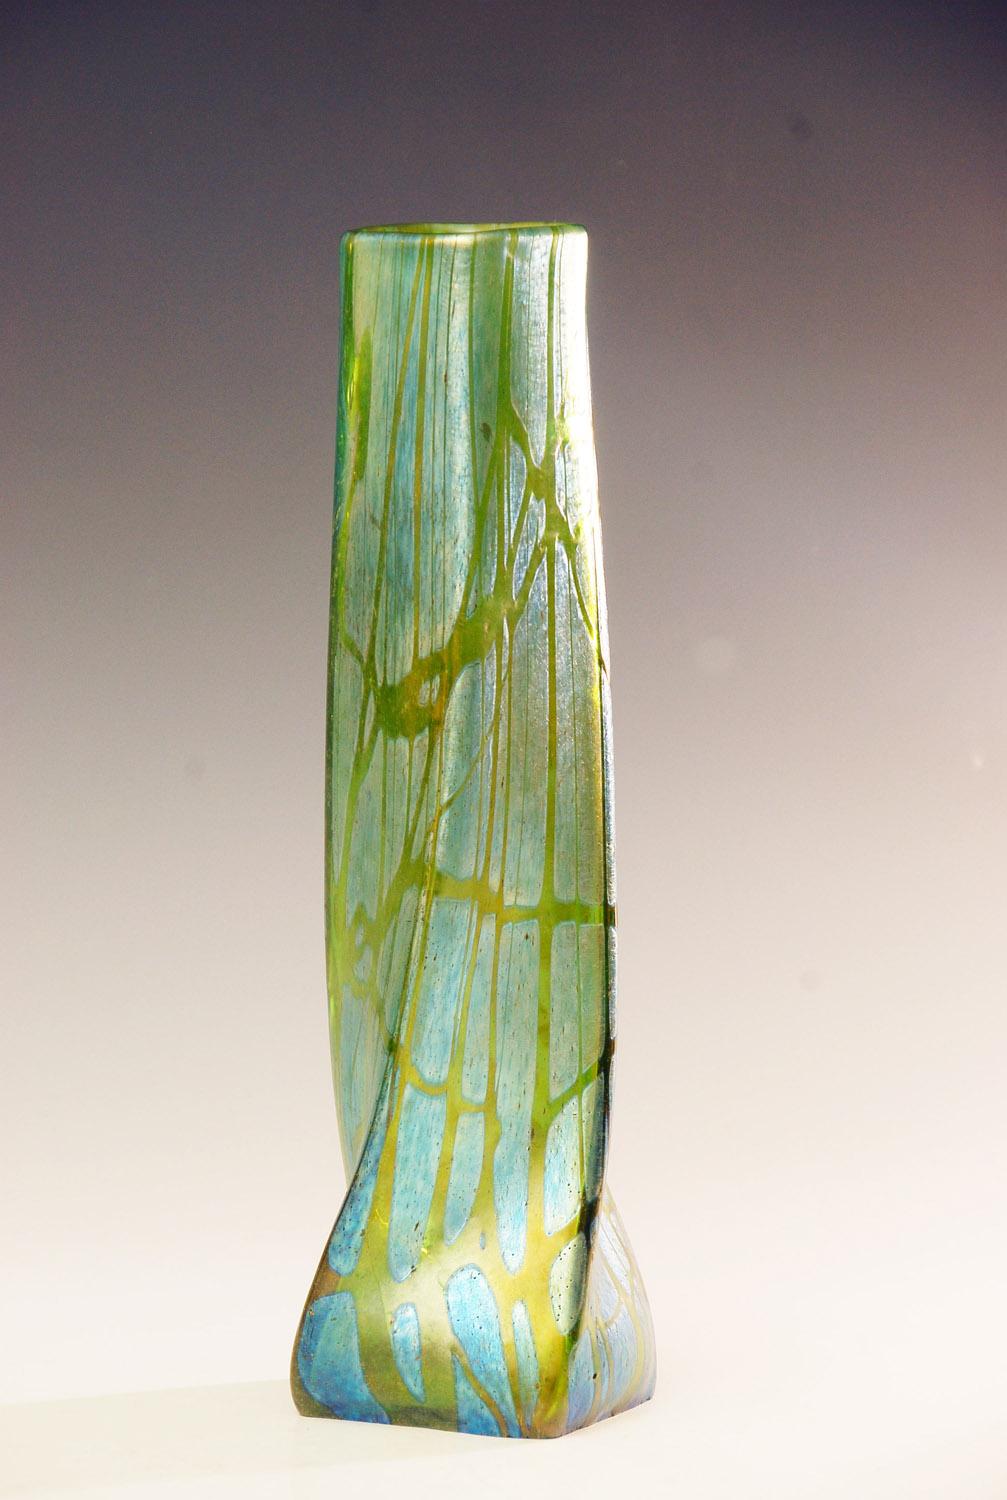 A superb Loetz Creta pampas iridescent Art Nouveau twist glass vase, circa 1900.

Price includes shipping to anywhere in the world.